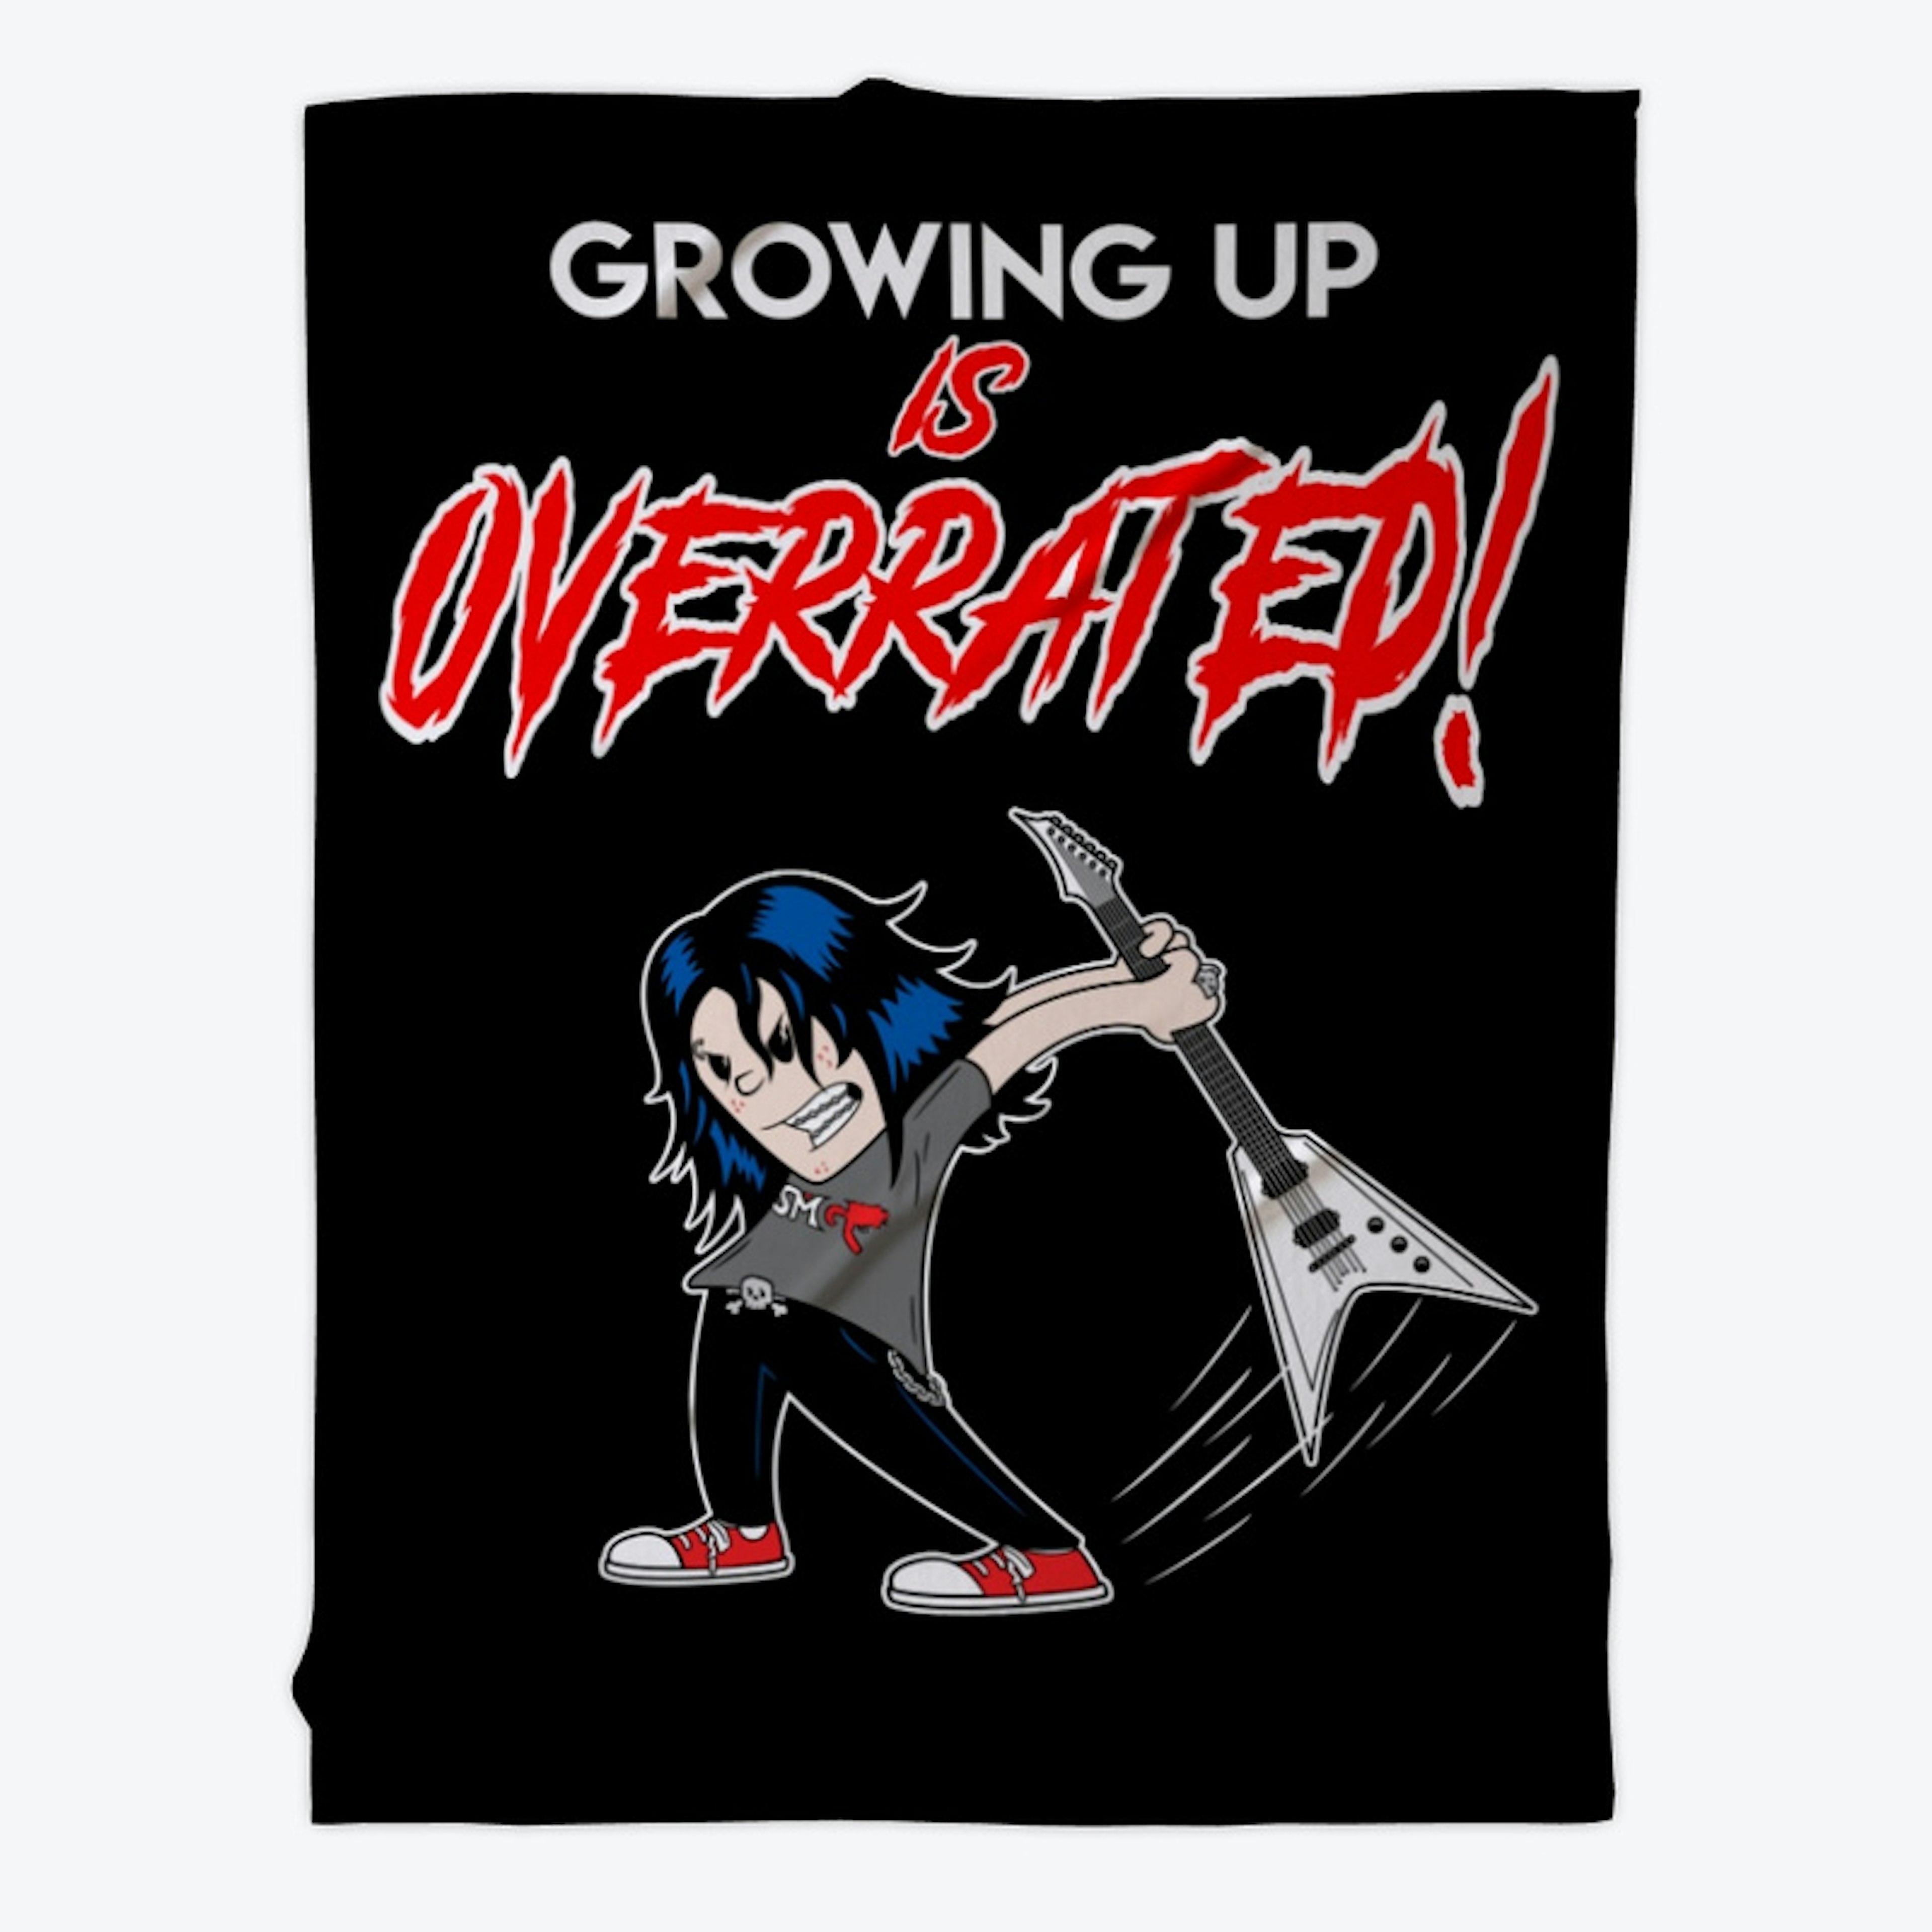 Growing up is Overrated!